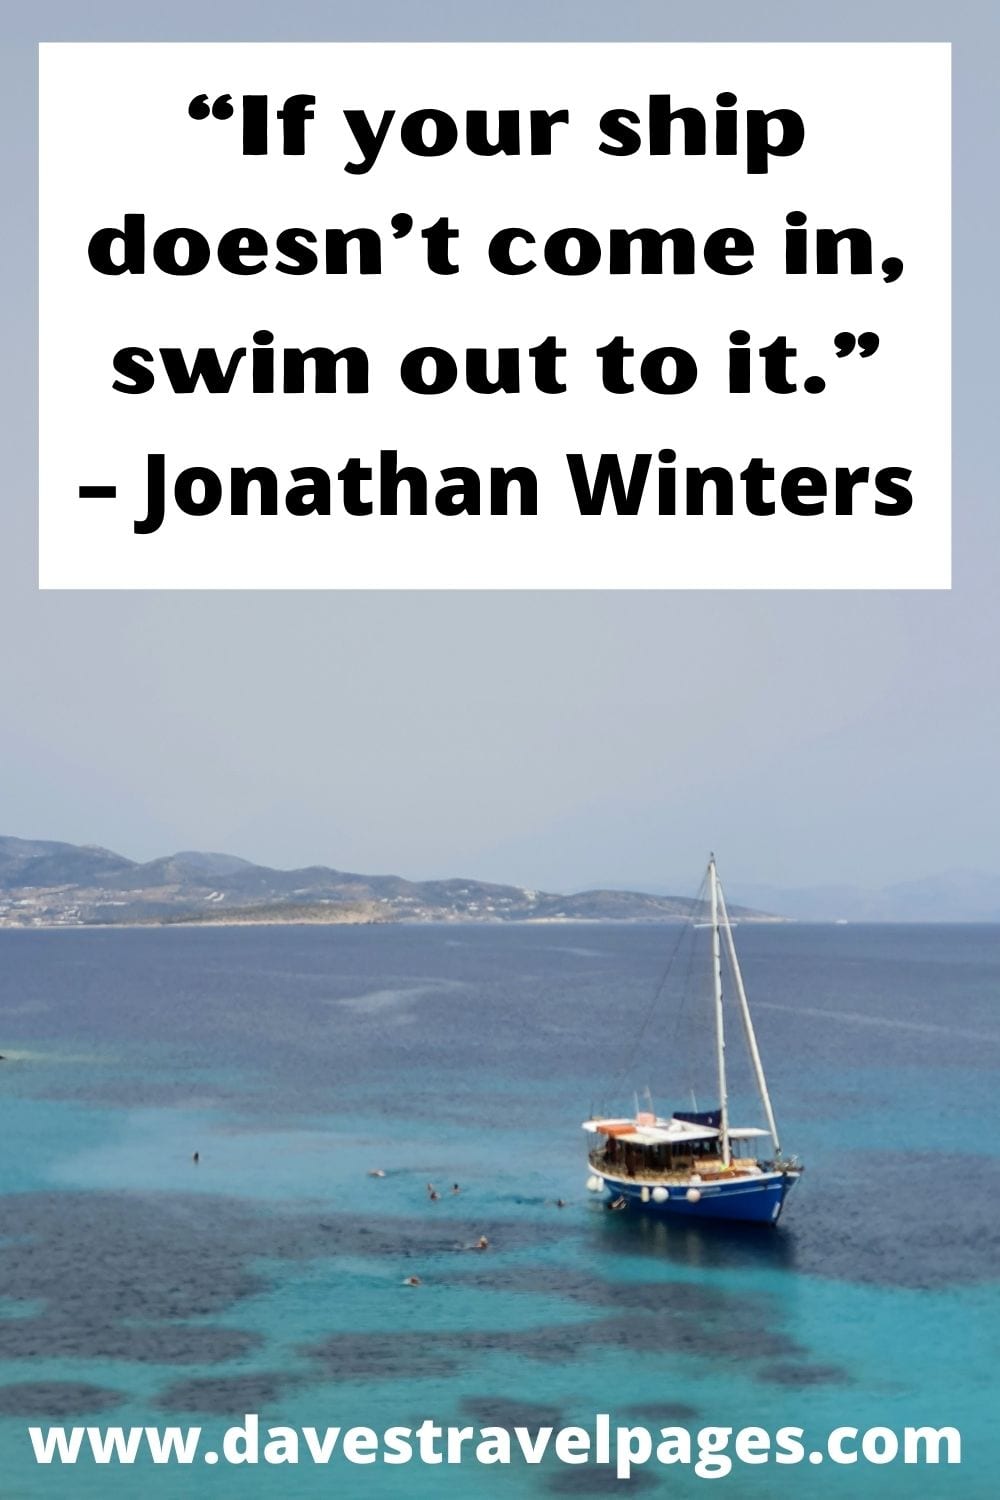 “If your ship doesn’t come in, swim out to it.” – Jonathan Winters